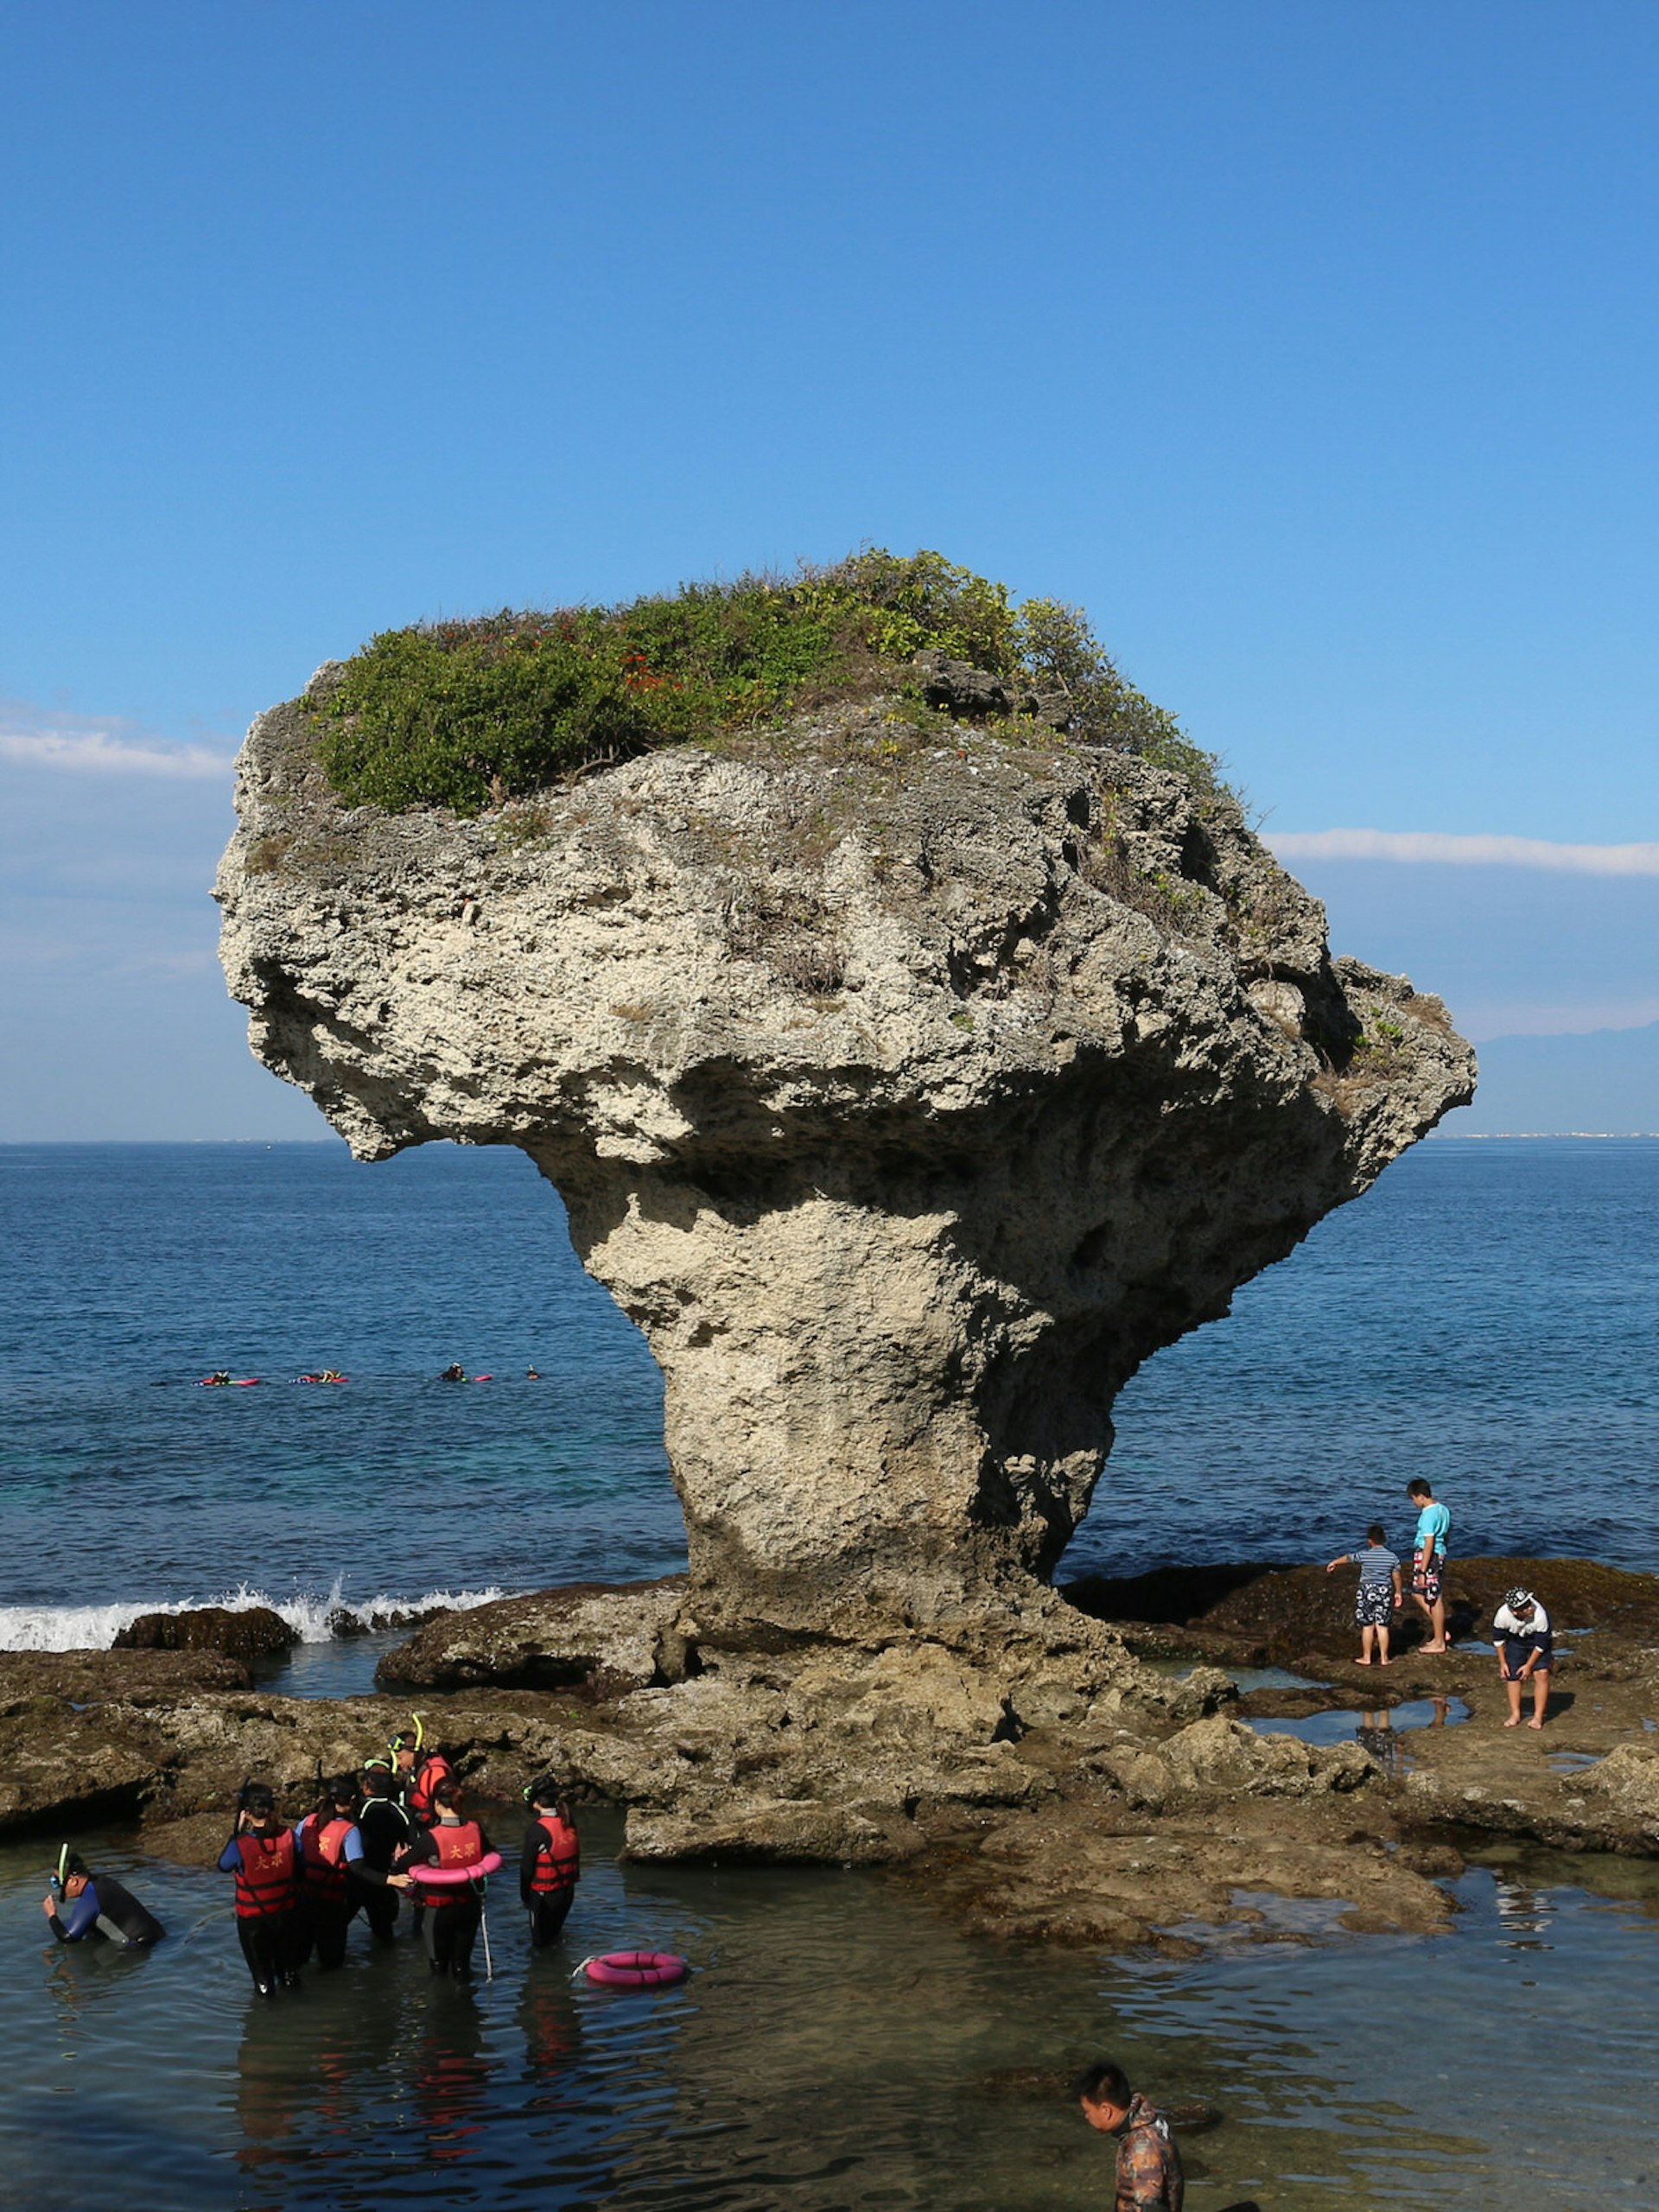 Swimmers and families wade in the shallows around Vase Rock: a coral rock formation formed by sea-level erosion. It is known for its mushroom-like shape. © Piera Chen / Lonely Planet